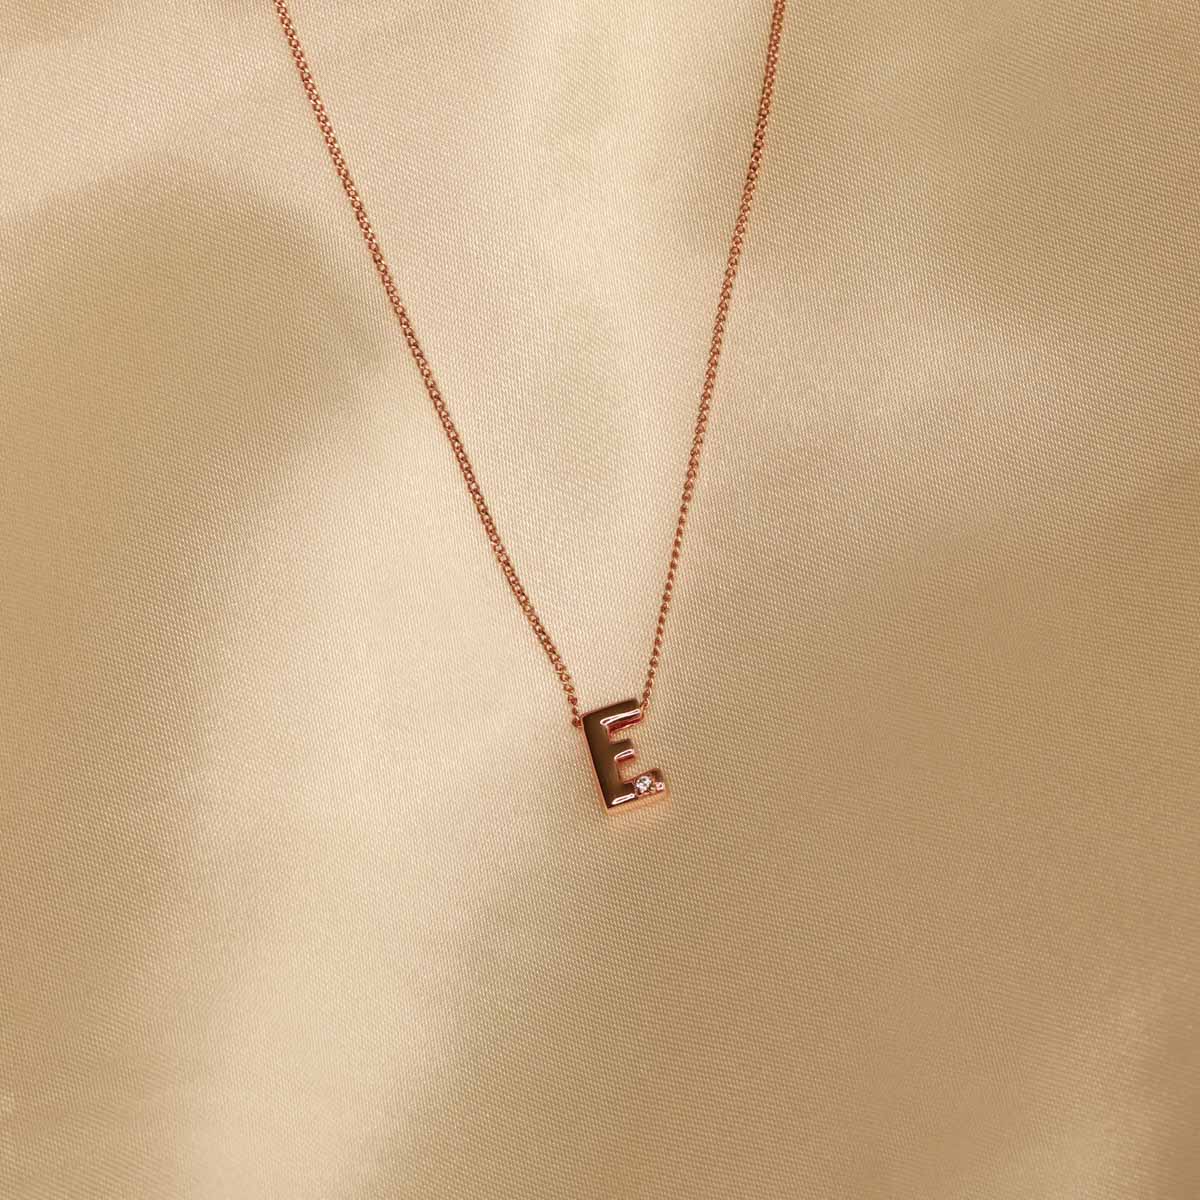 Flat lay shot of E Initial Pendant Necklace in Rose Gold